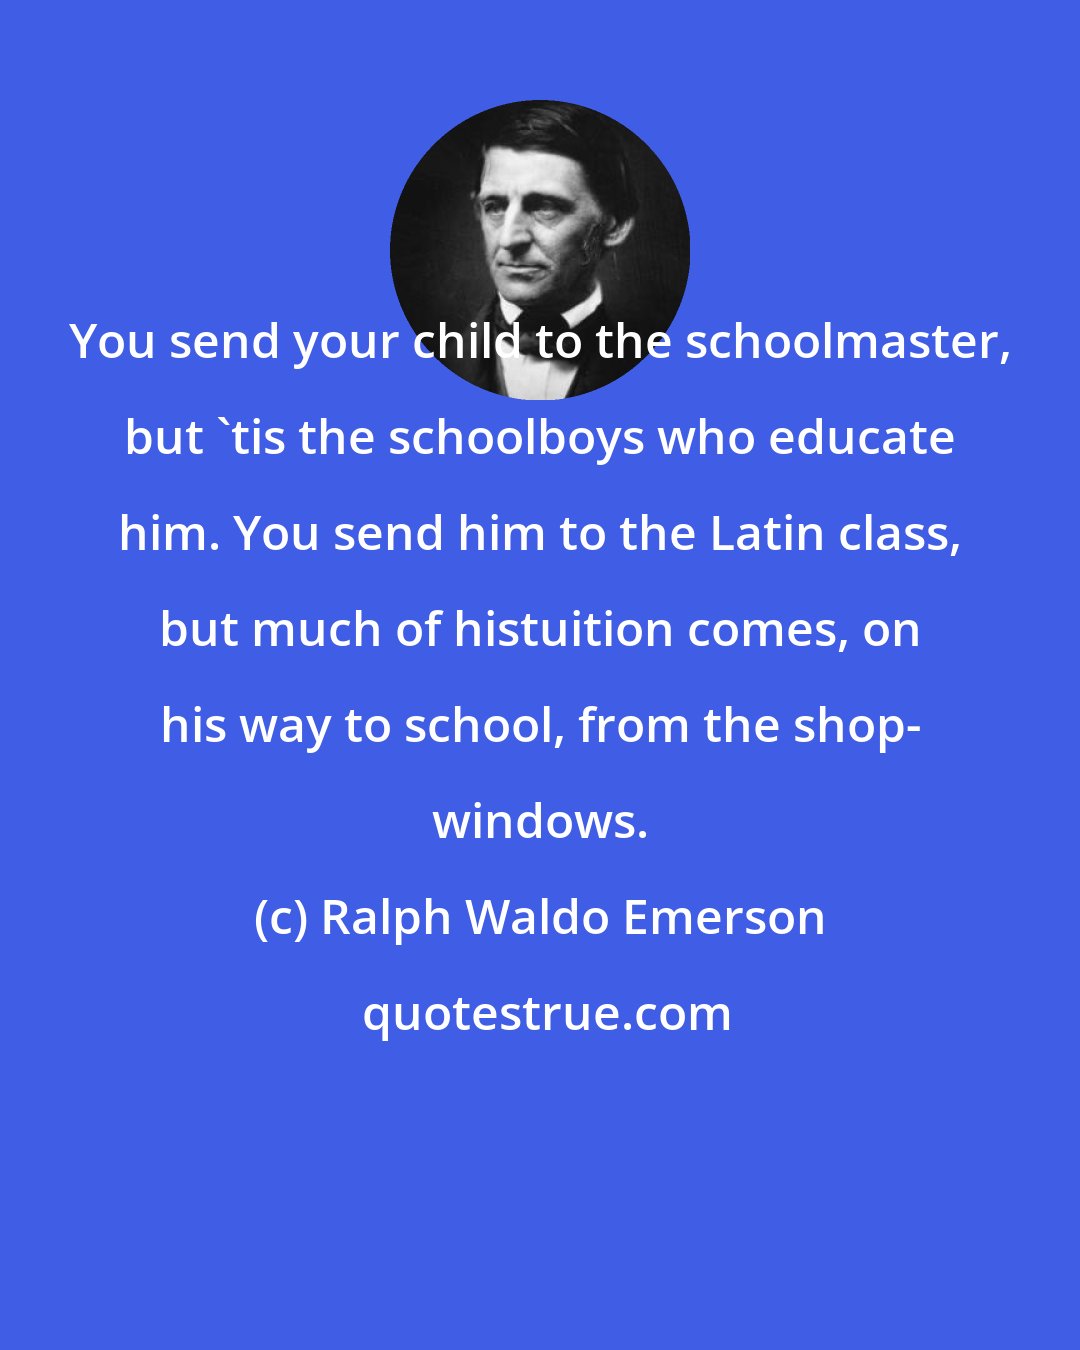 Ralph Waldo Emerson: You send your child to the schoolmaster, but 'tis the schoolboys who educate him. You send him to the Latin class, but much of histuition comes, on his way to school, from the shop- windows.